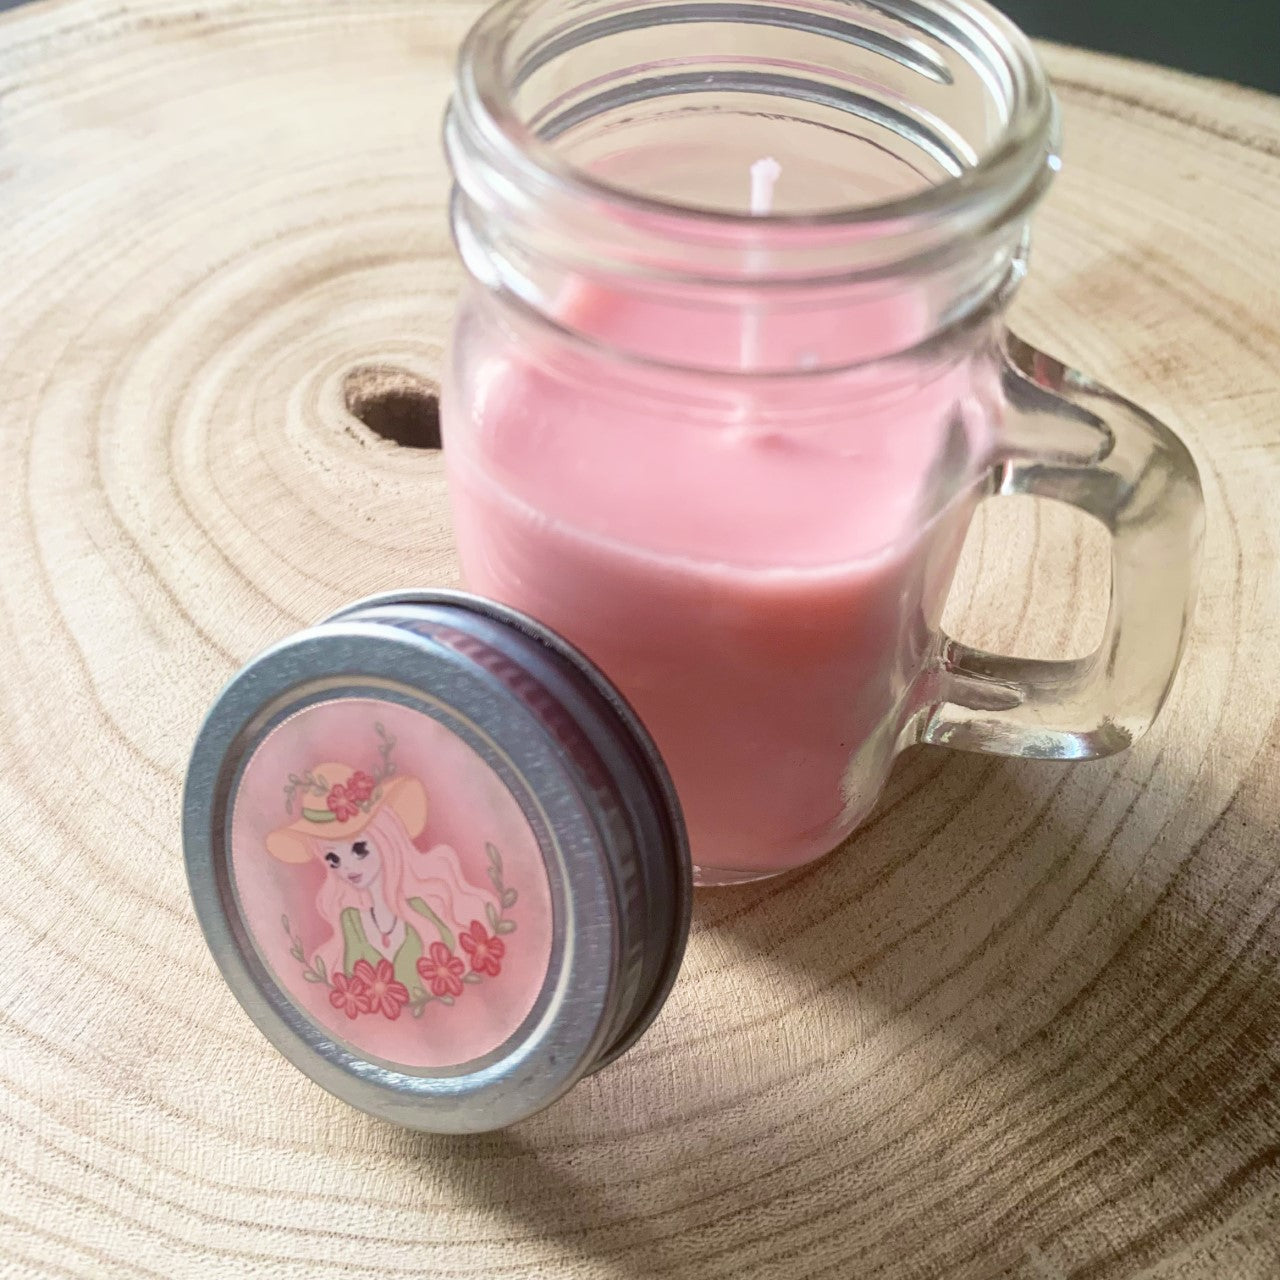 Small pink candle in a jar - Floral hat girl